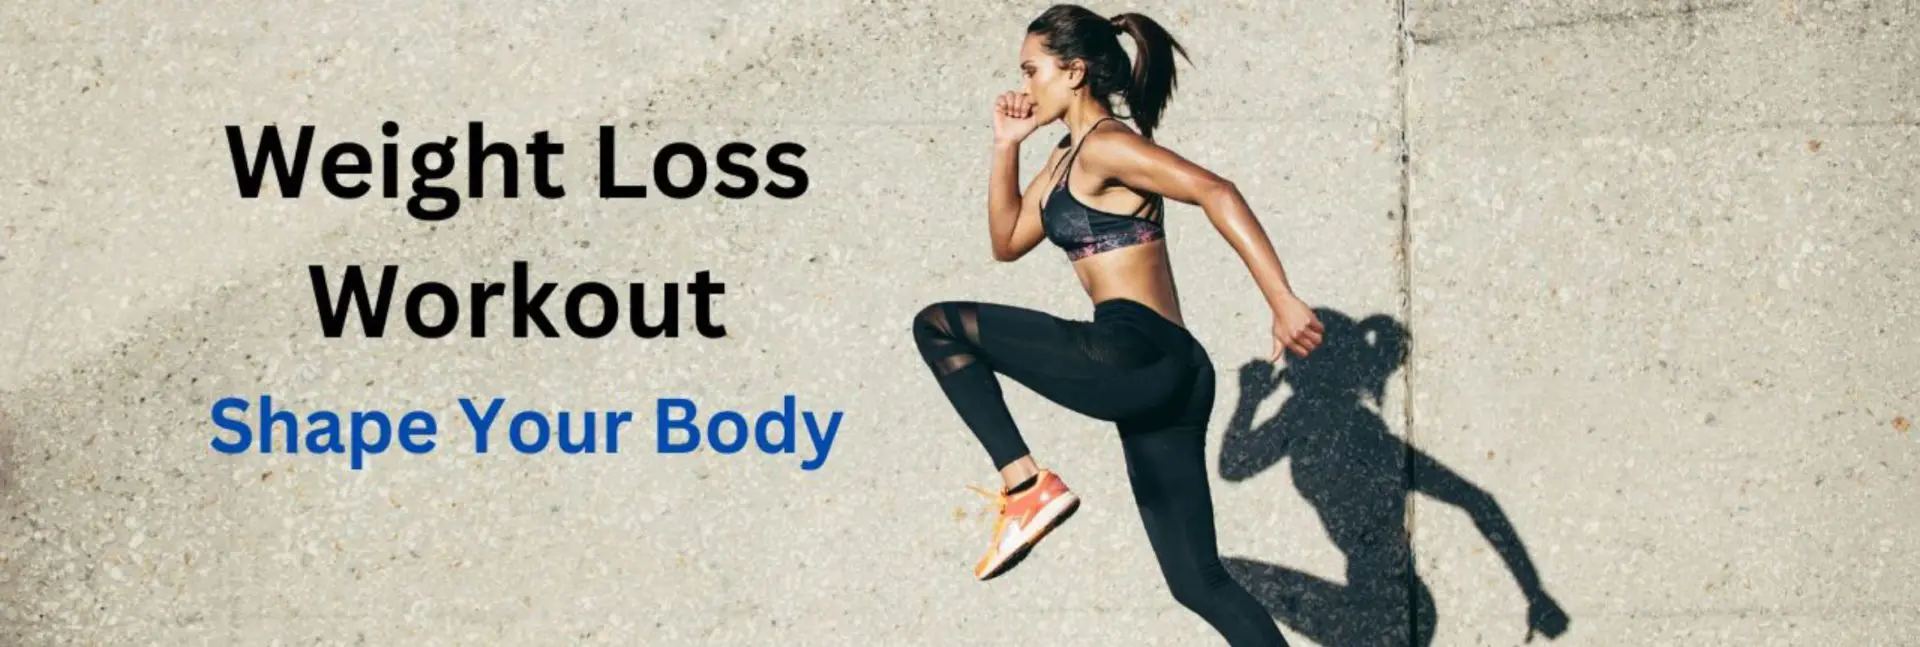 Weight Loss Workout - Arth Skin & Fitness